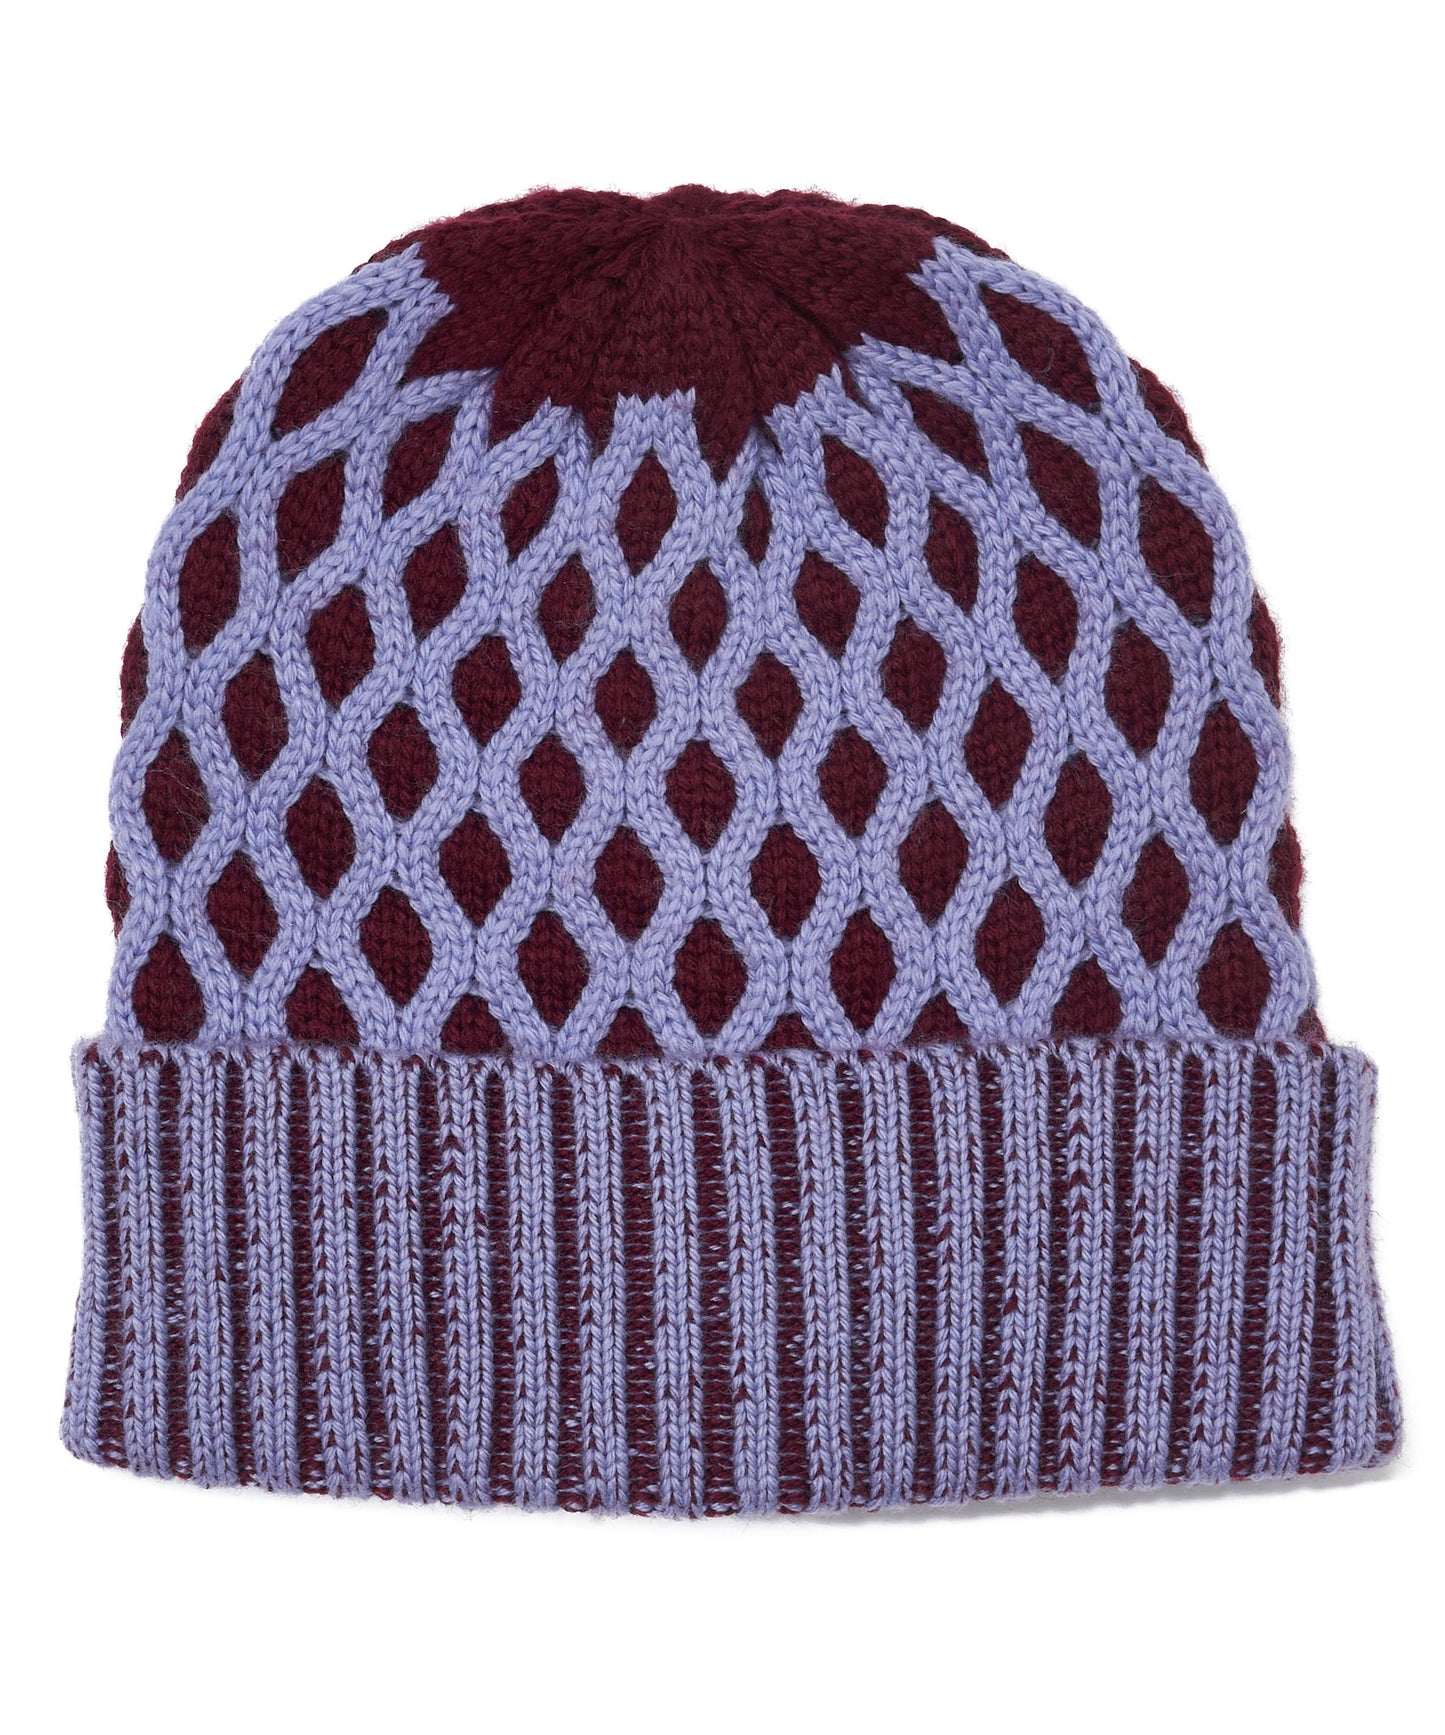 Recycled Bi-color Honeycomb Beanie in color Mulled Wine